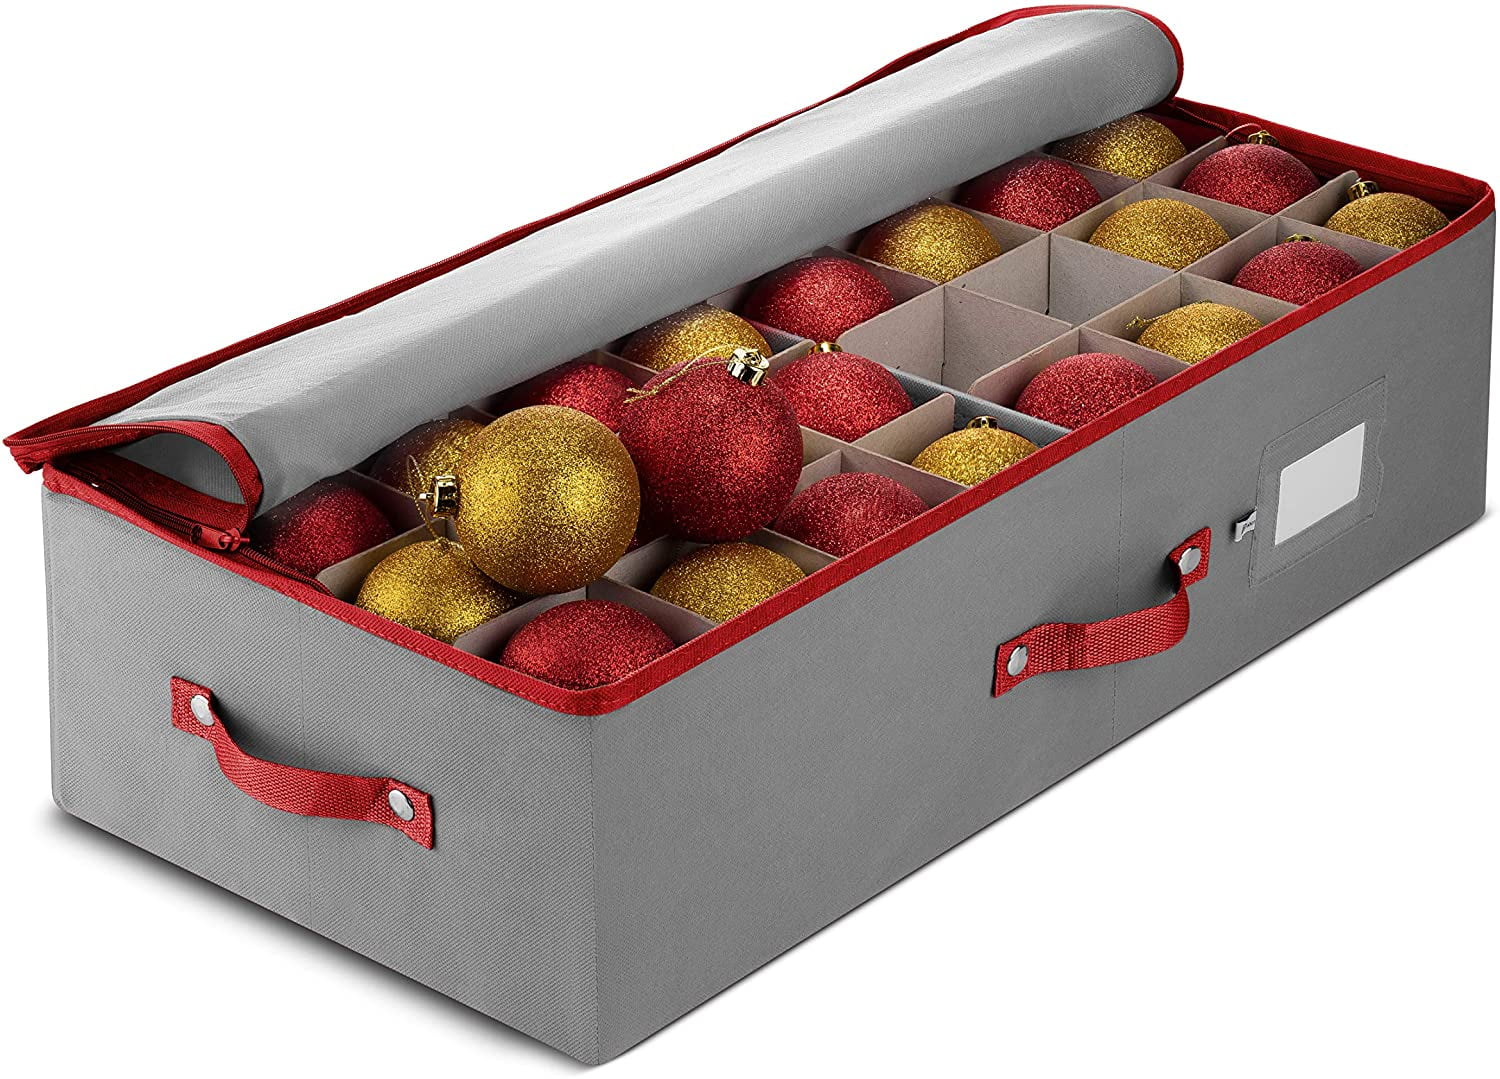 HOLDN’ Storage Underbed Christmas Ornament Storage Container Box with Dividers - Convenient Durable 2 Individual Removable Trays Fits Up to 48-3”